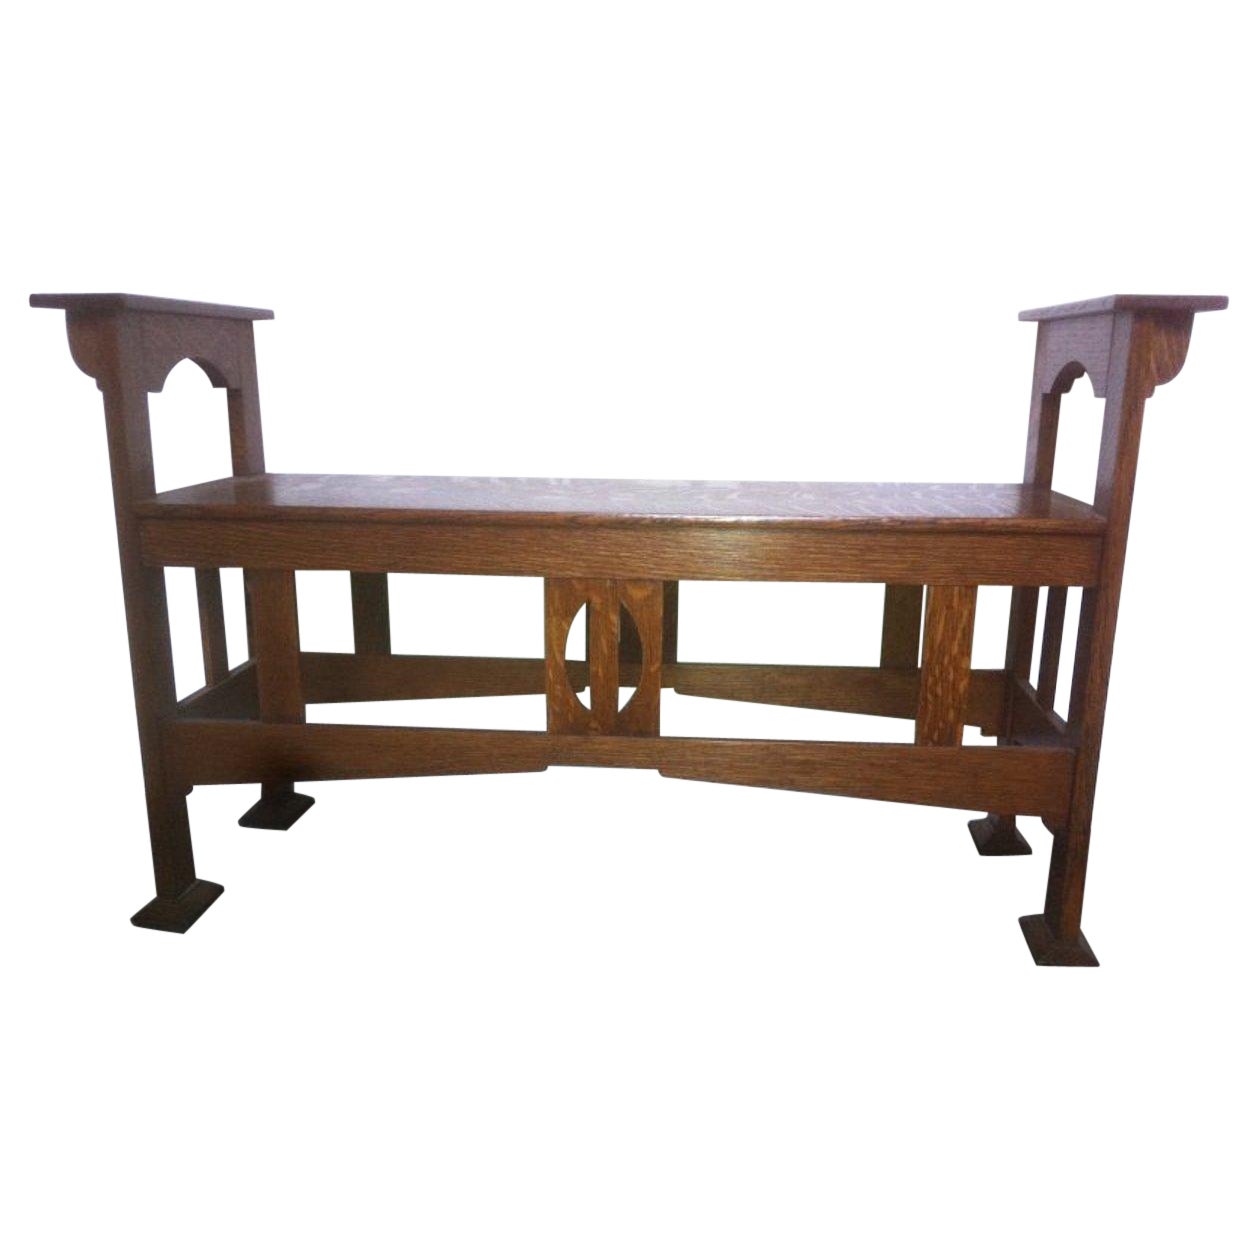 Shapland & Petter, A Good Arts & Crafts Oak Double Piano Stool Or Window Seat